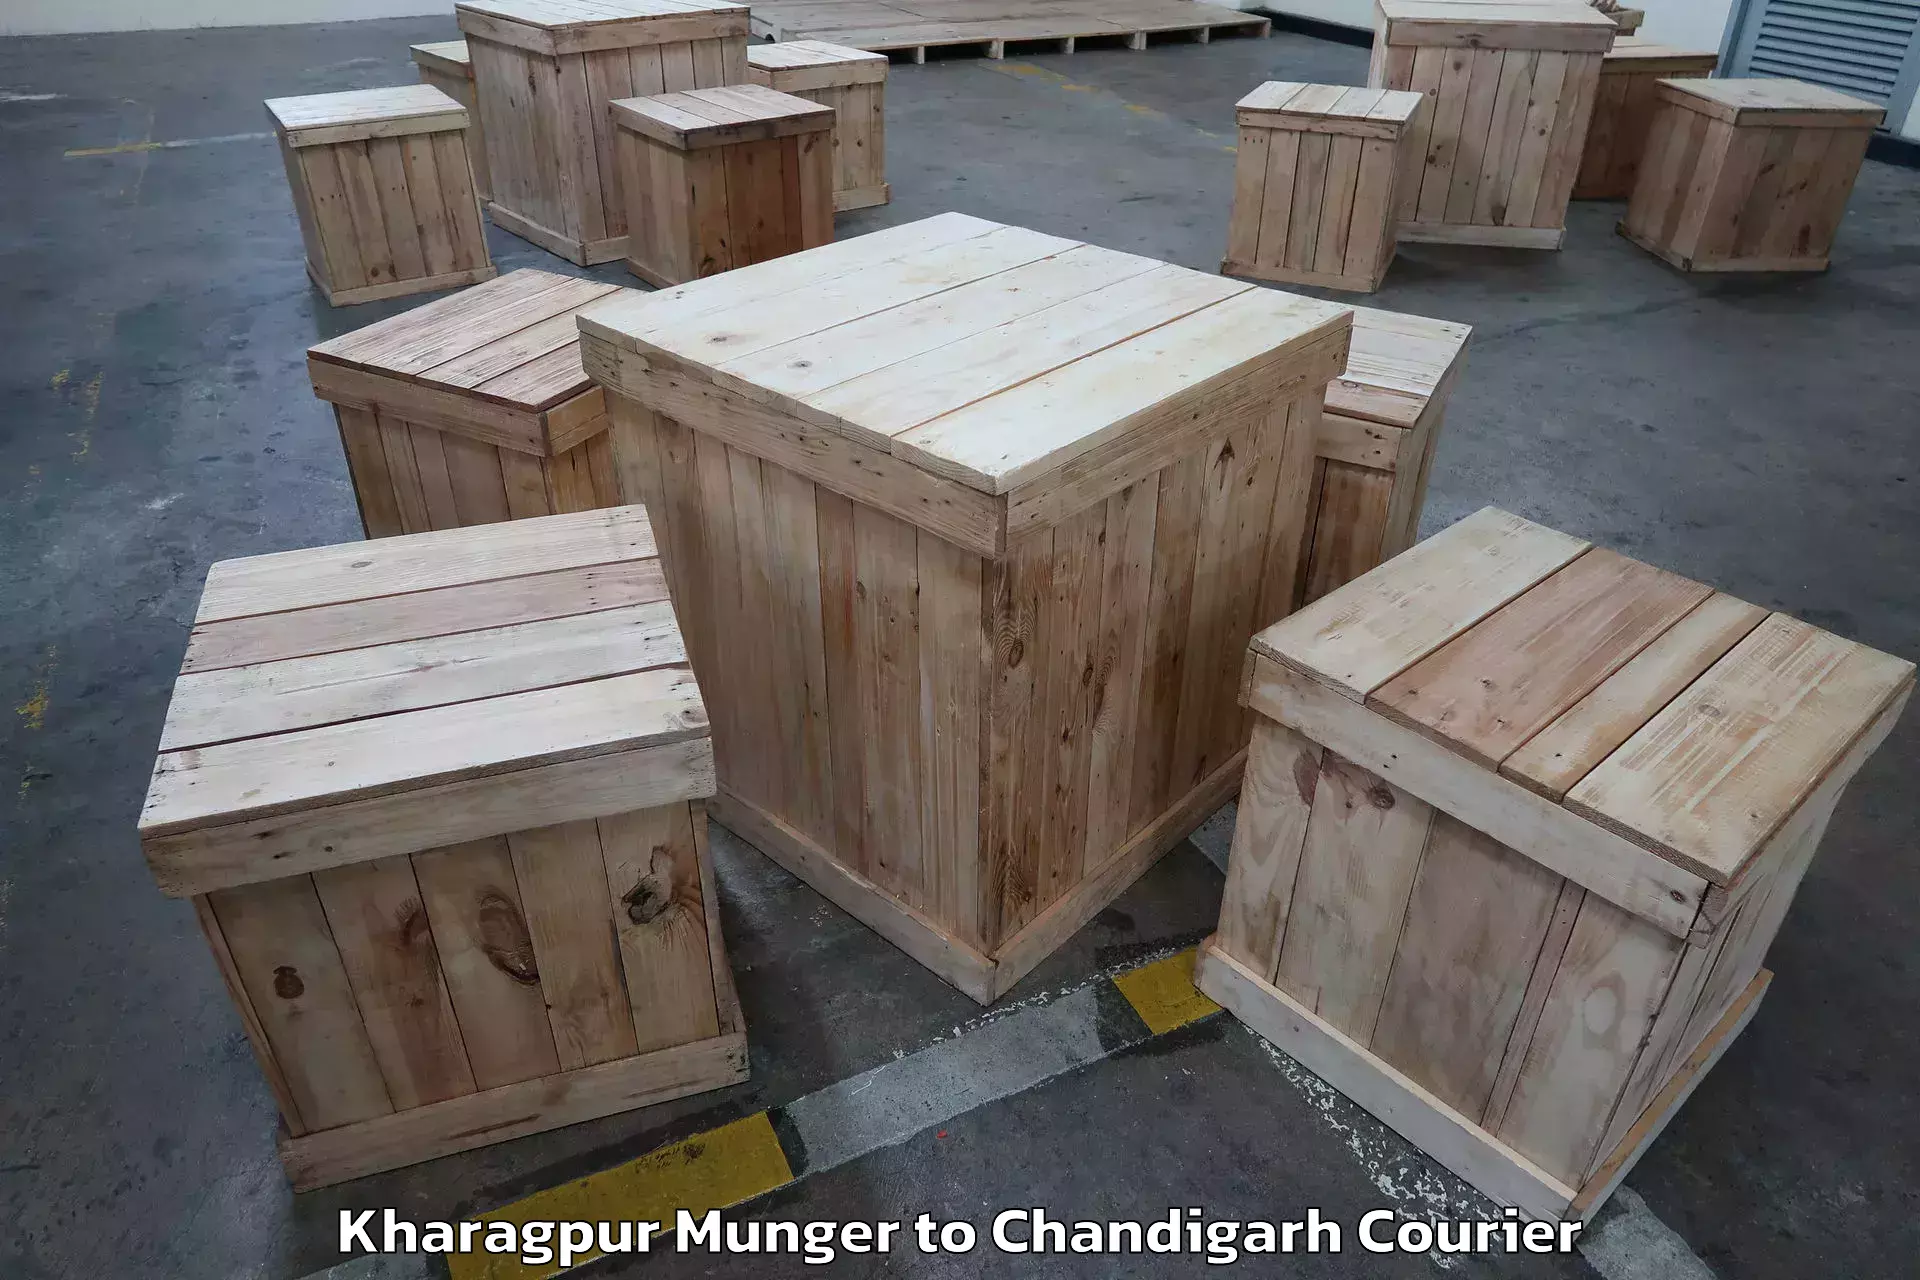 Moving and packing experts Kharagpur Munger to Chandigarh